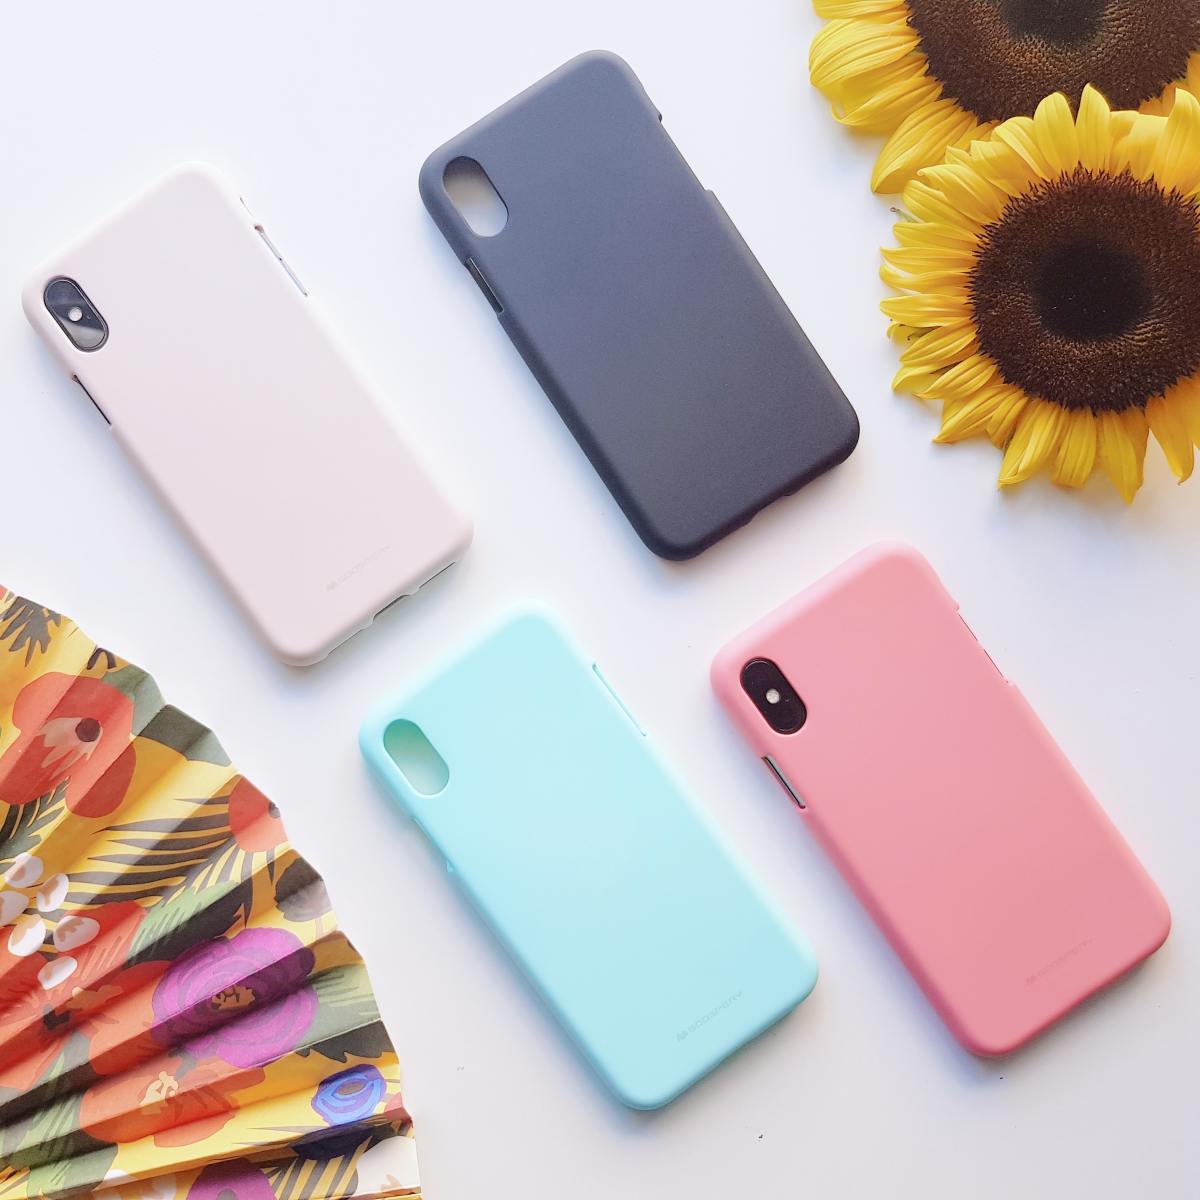 Two of the most popular styles of phone case are tough cases and snap cases.